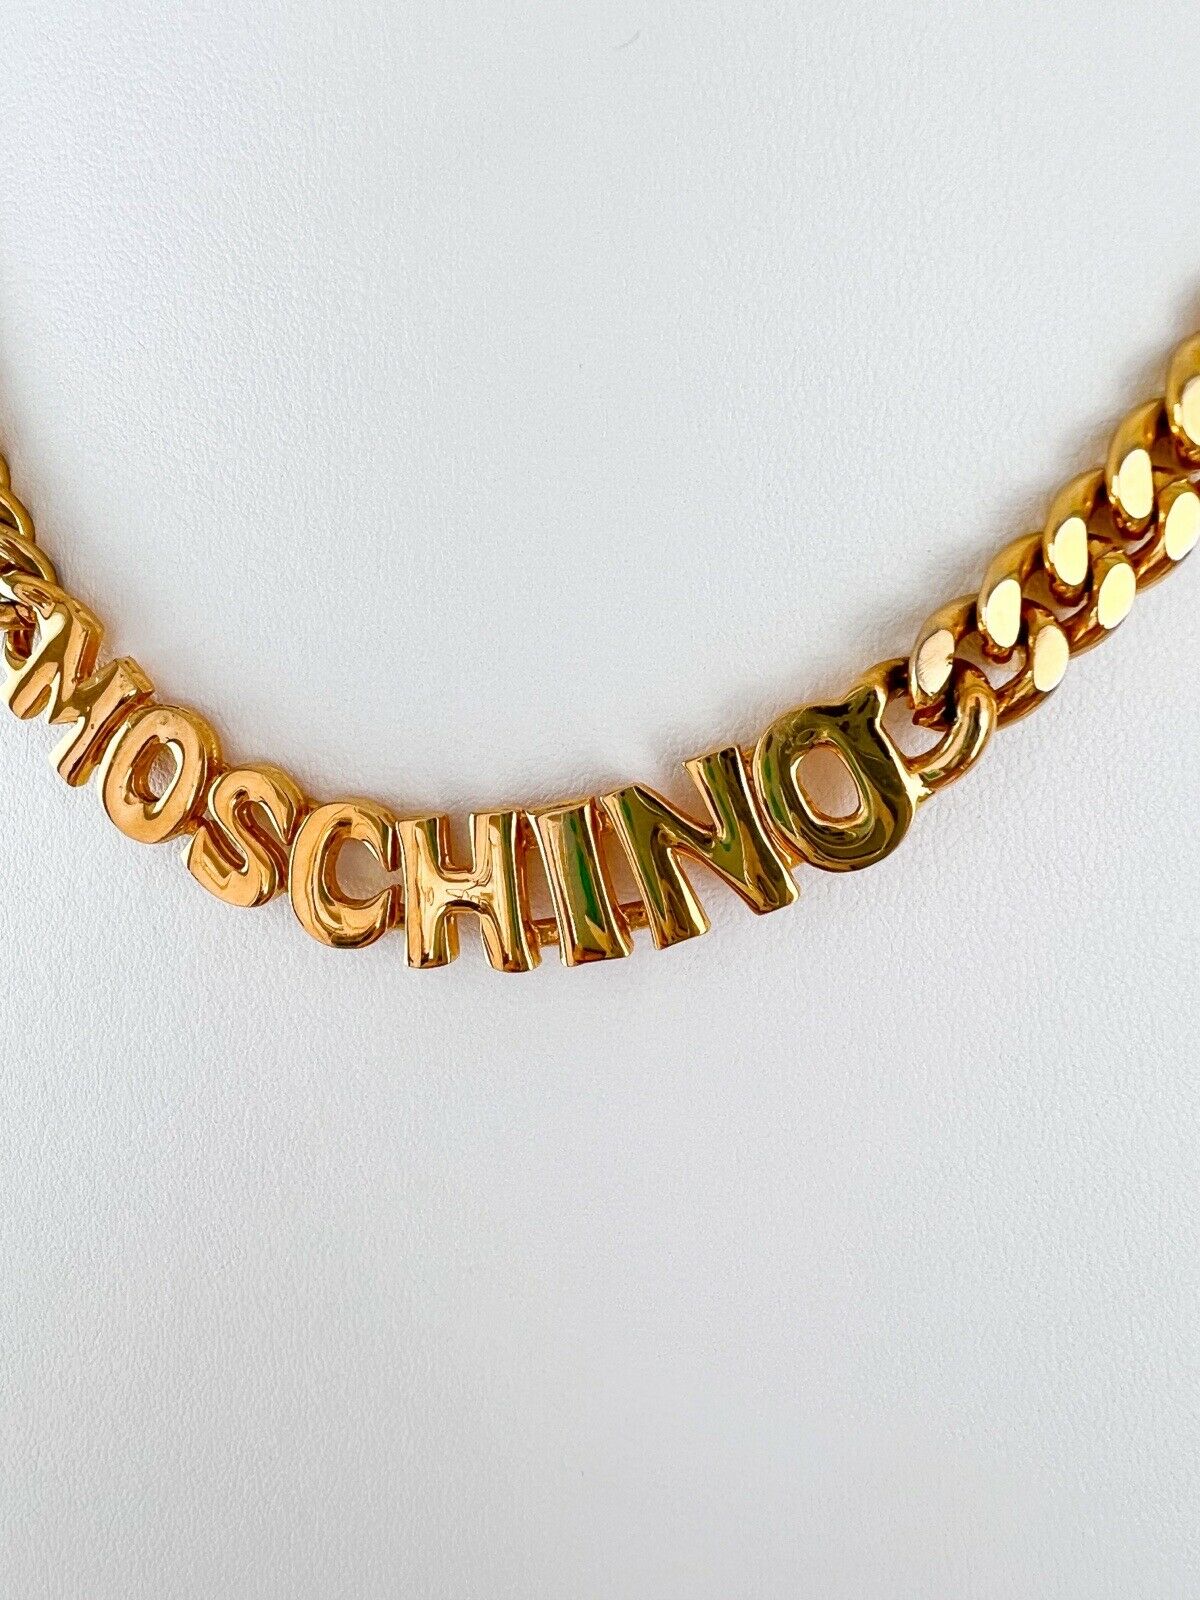 【SOLD OUT】Moschino Vintage Gold Tone Choker Necklace Chain Logo Charm